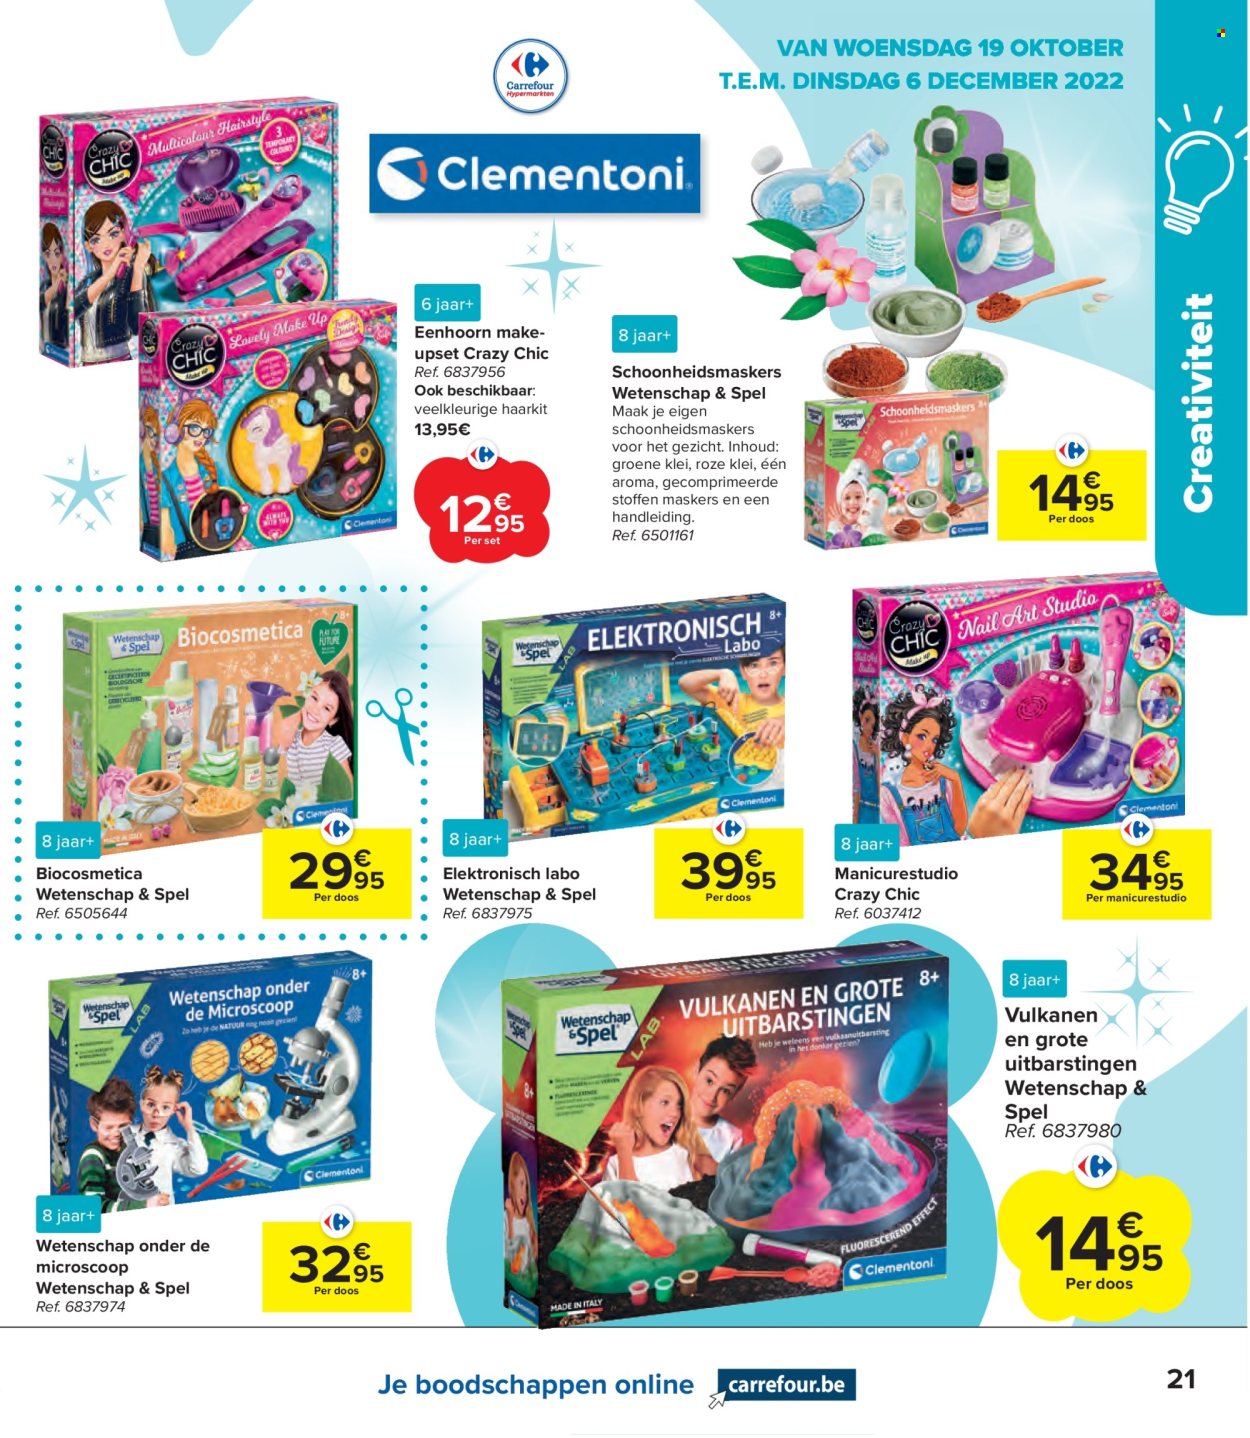 Catalogue Carrefour hypermarkt - 19.10.2022 - 6.12.2022. Page 21.